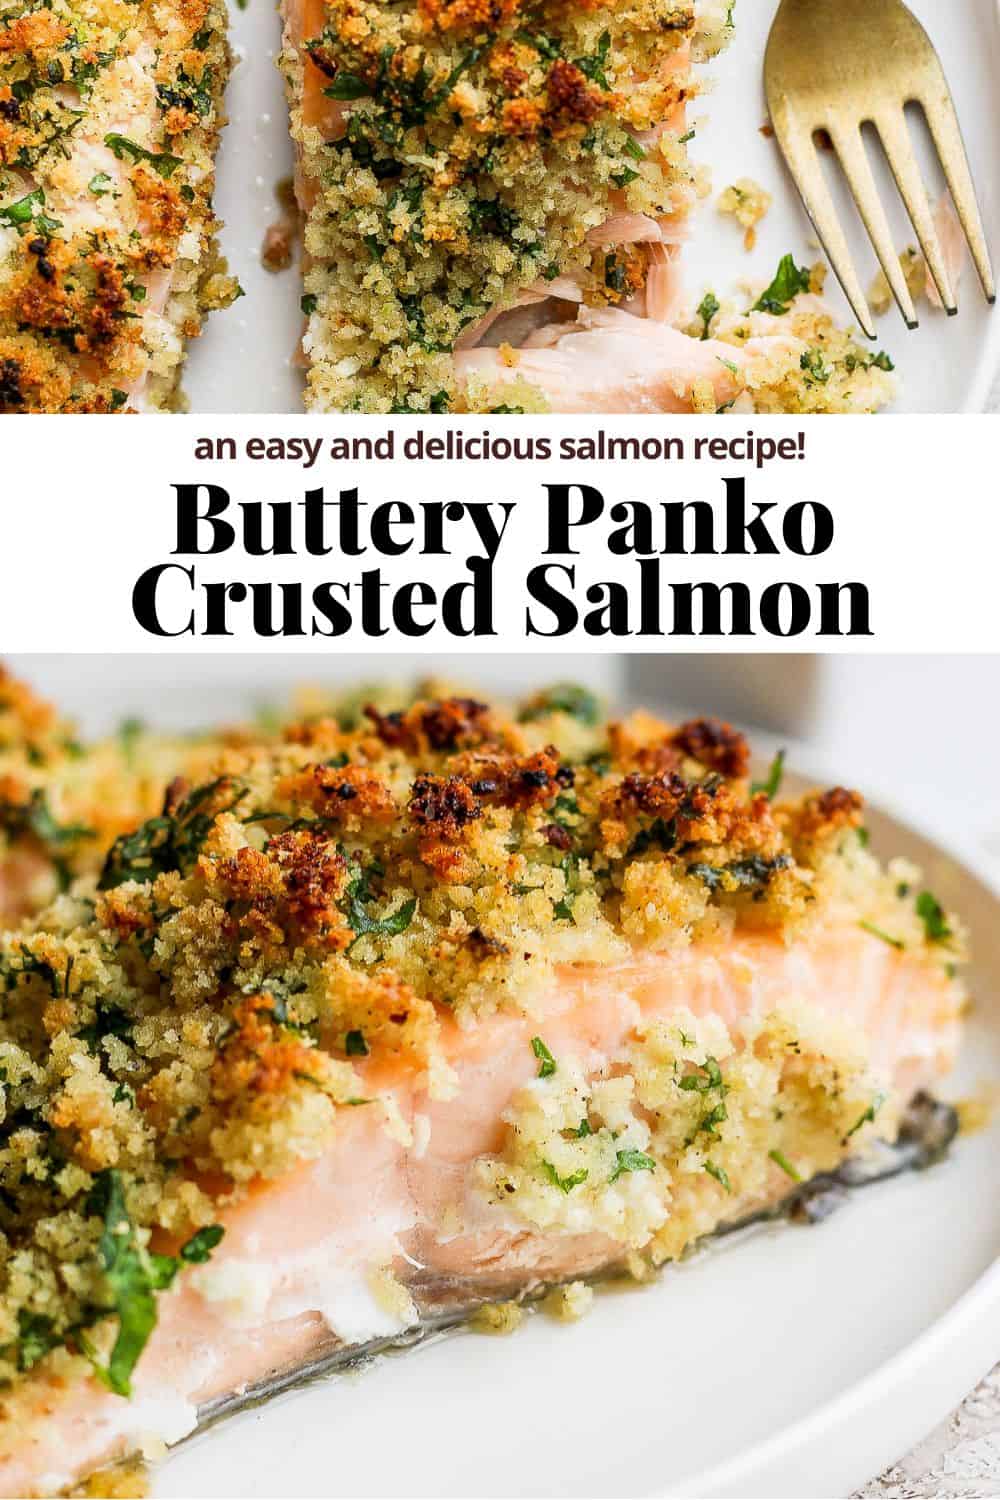 Pinterest image showing a top down shot of panko crusted salmon, the recipe title, and then a close up side image of the panko crusted salmon.